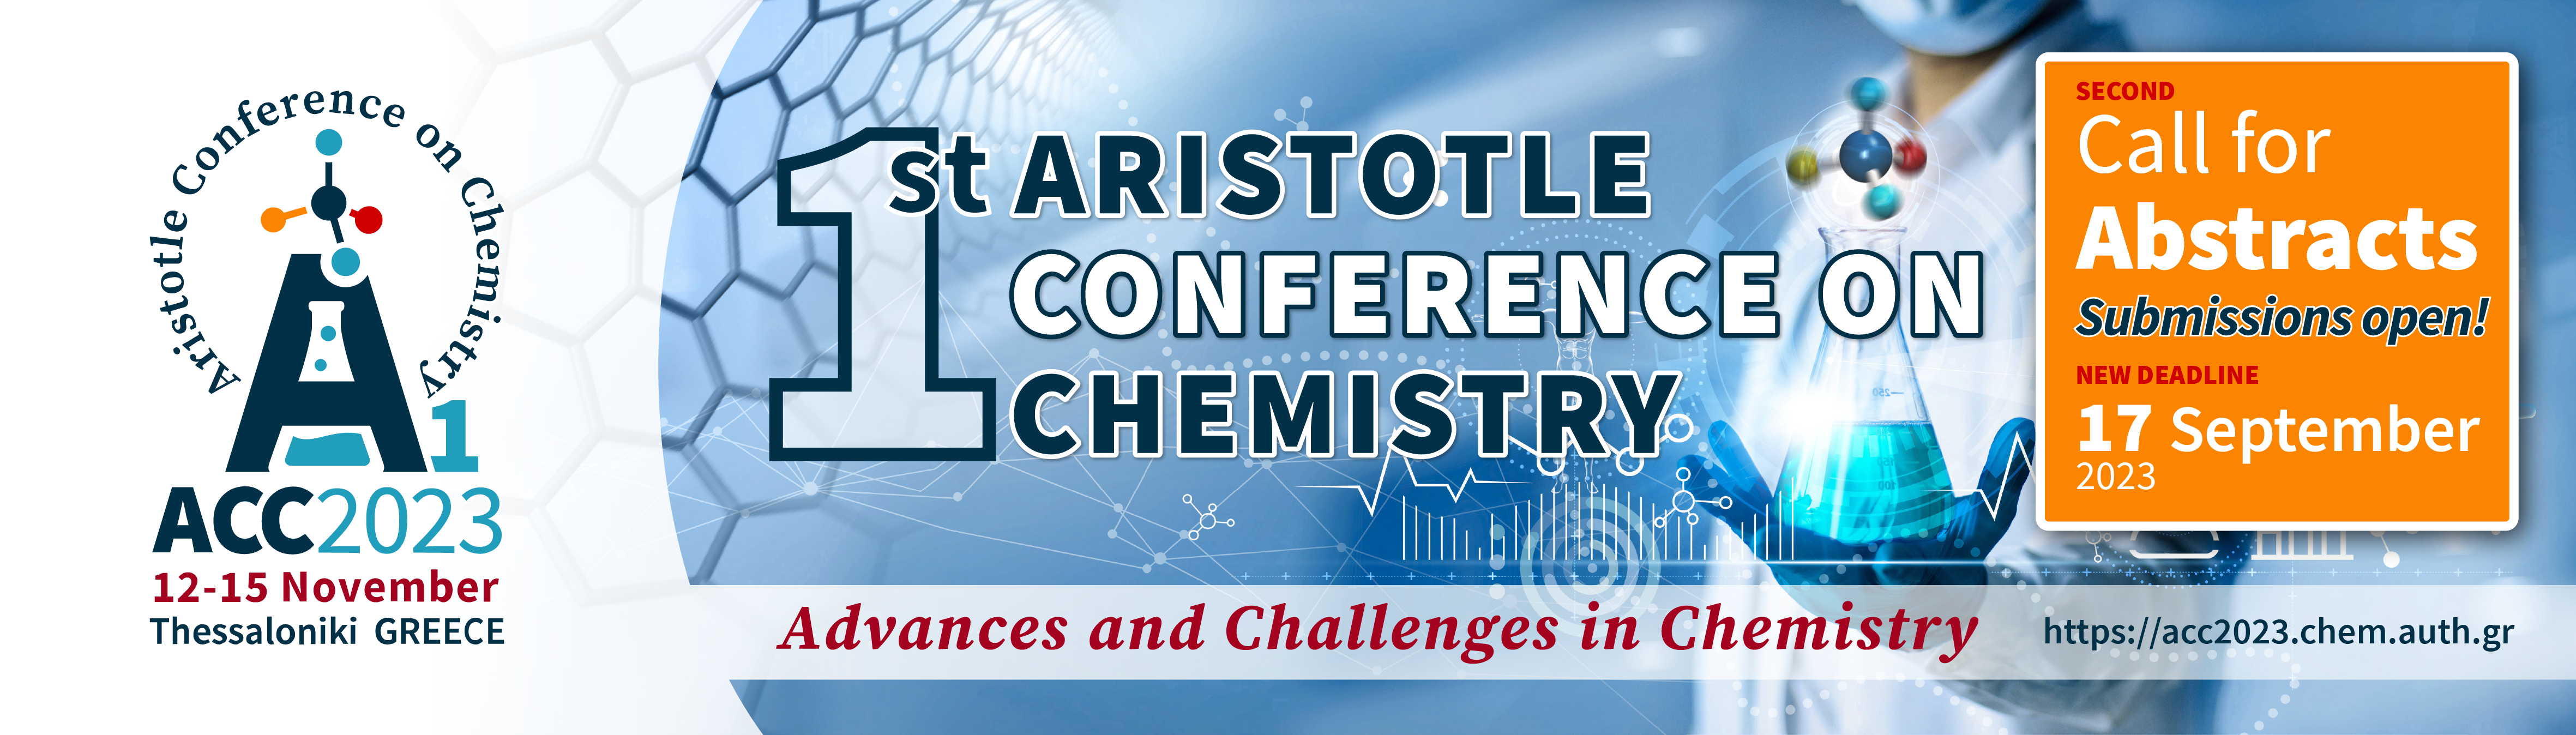 2nd Call for abstracts ACC2023